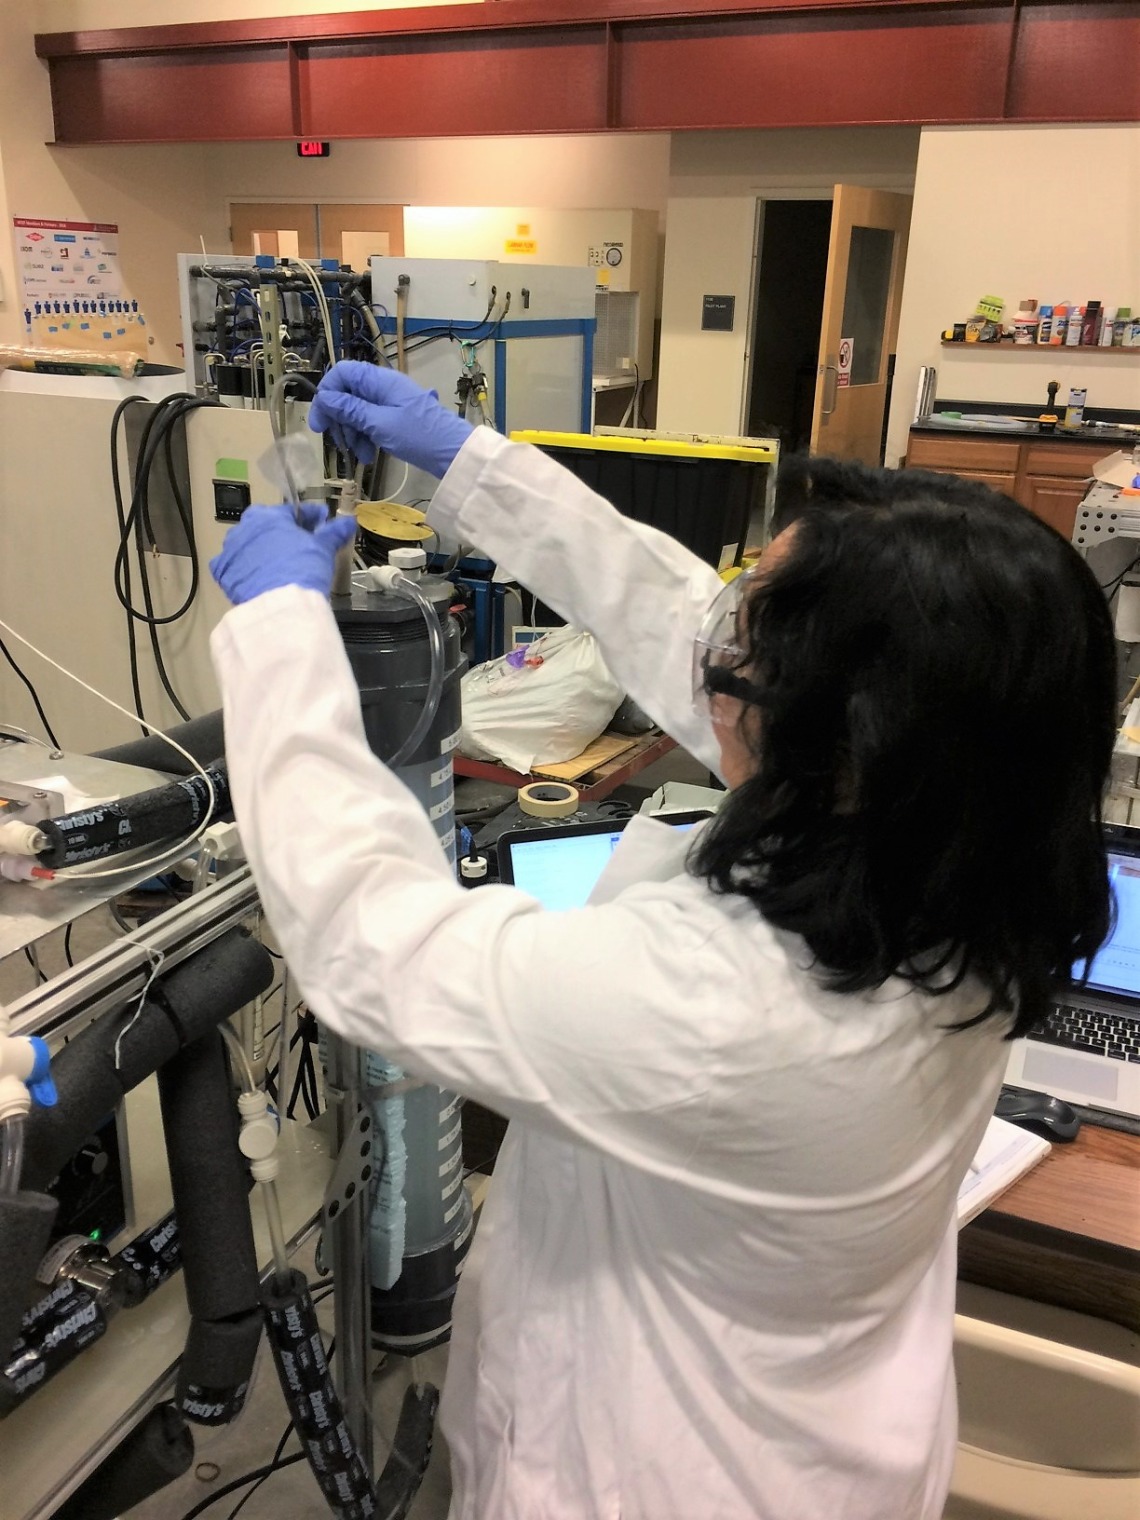 UA student Casandra Flores works on the bench-scale membrane distillation (MD) system